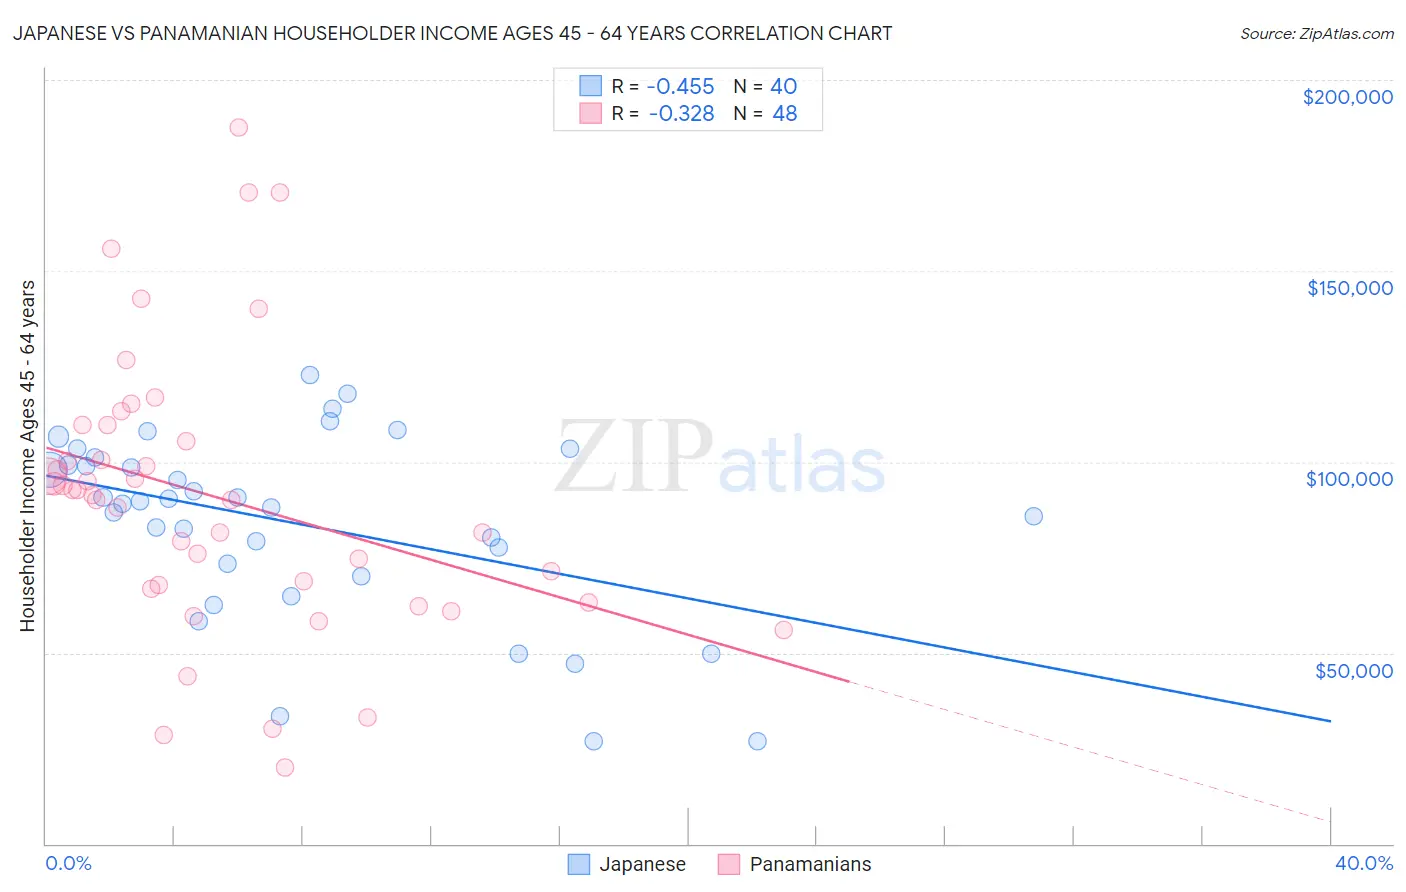 Japanese vs Panamanian Householder Income Ages 45 - 64 years